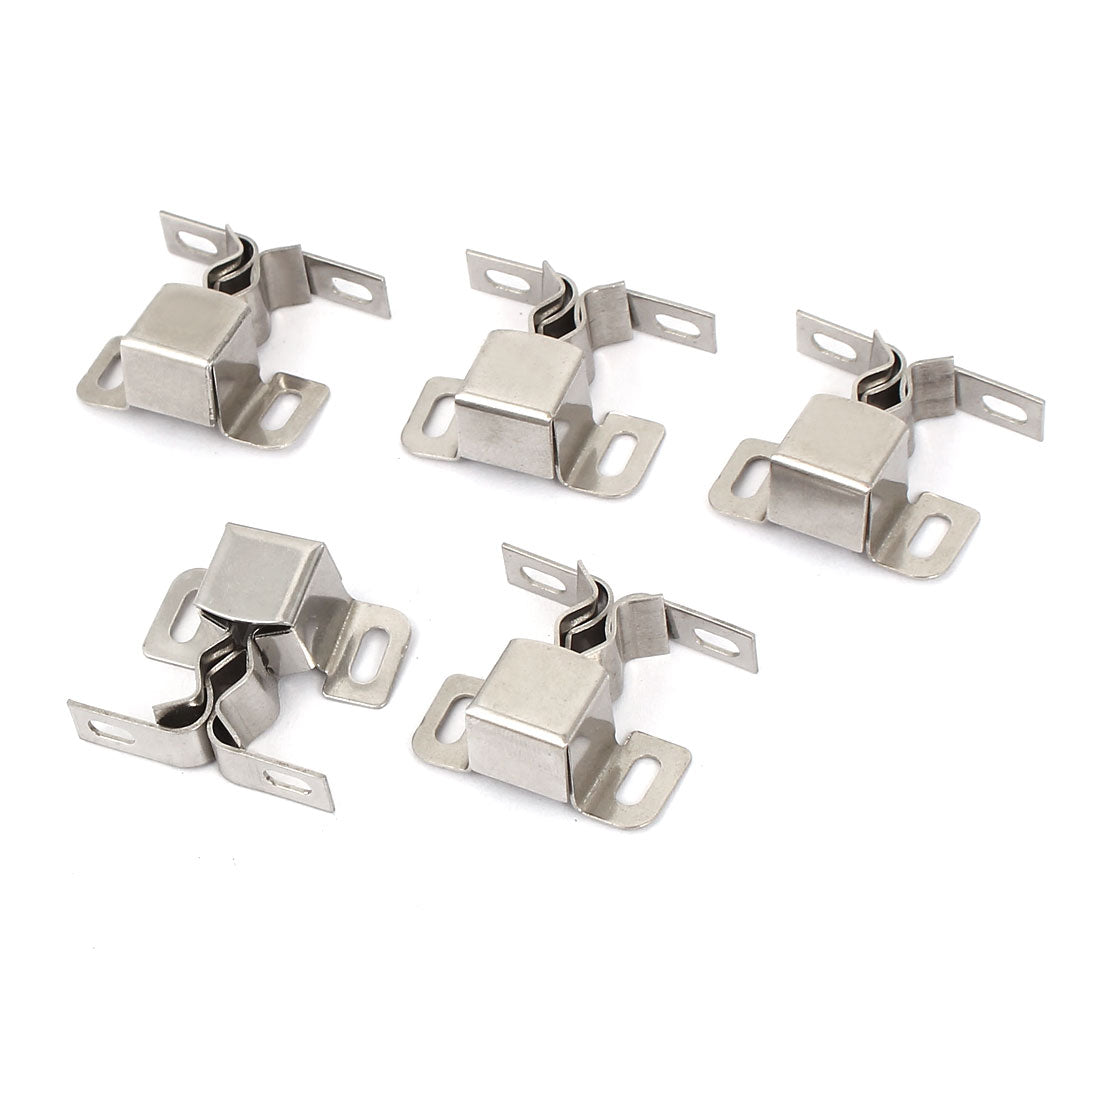 uxcell Uxcell Cabinet Cupboard Door Stainless Steel Catch Latch Silver Tone 5pcs